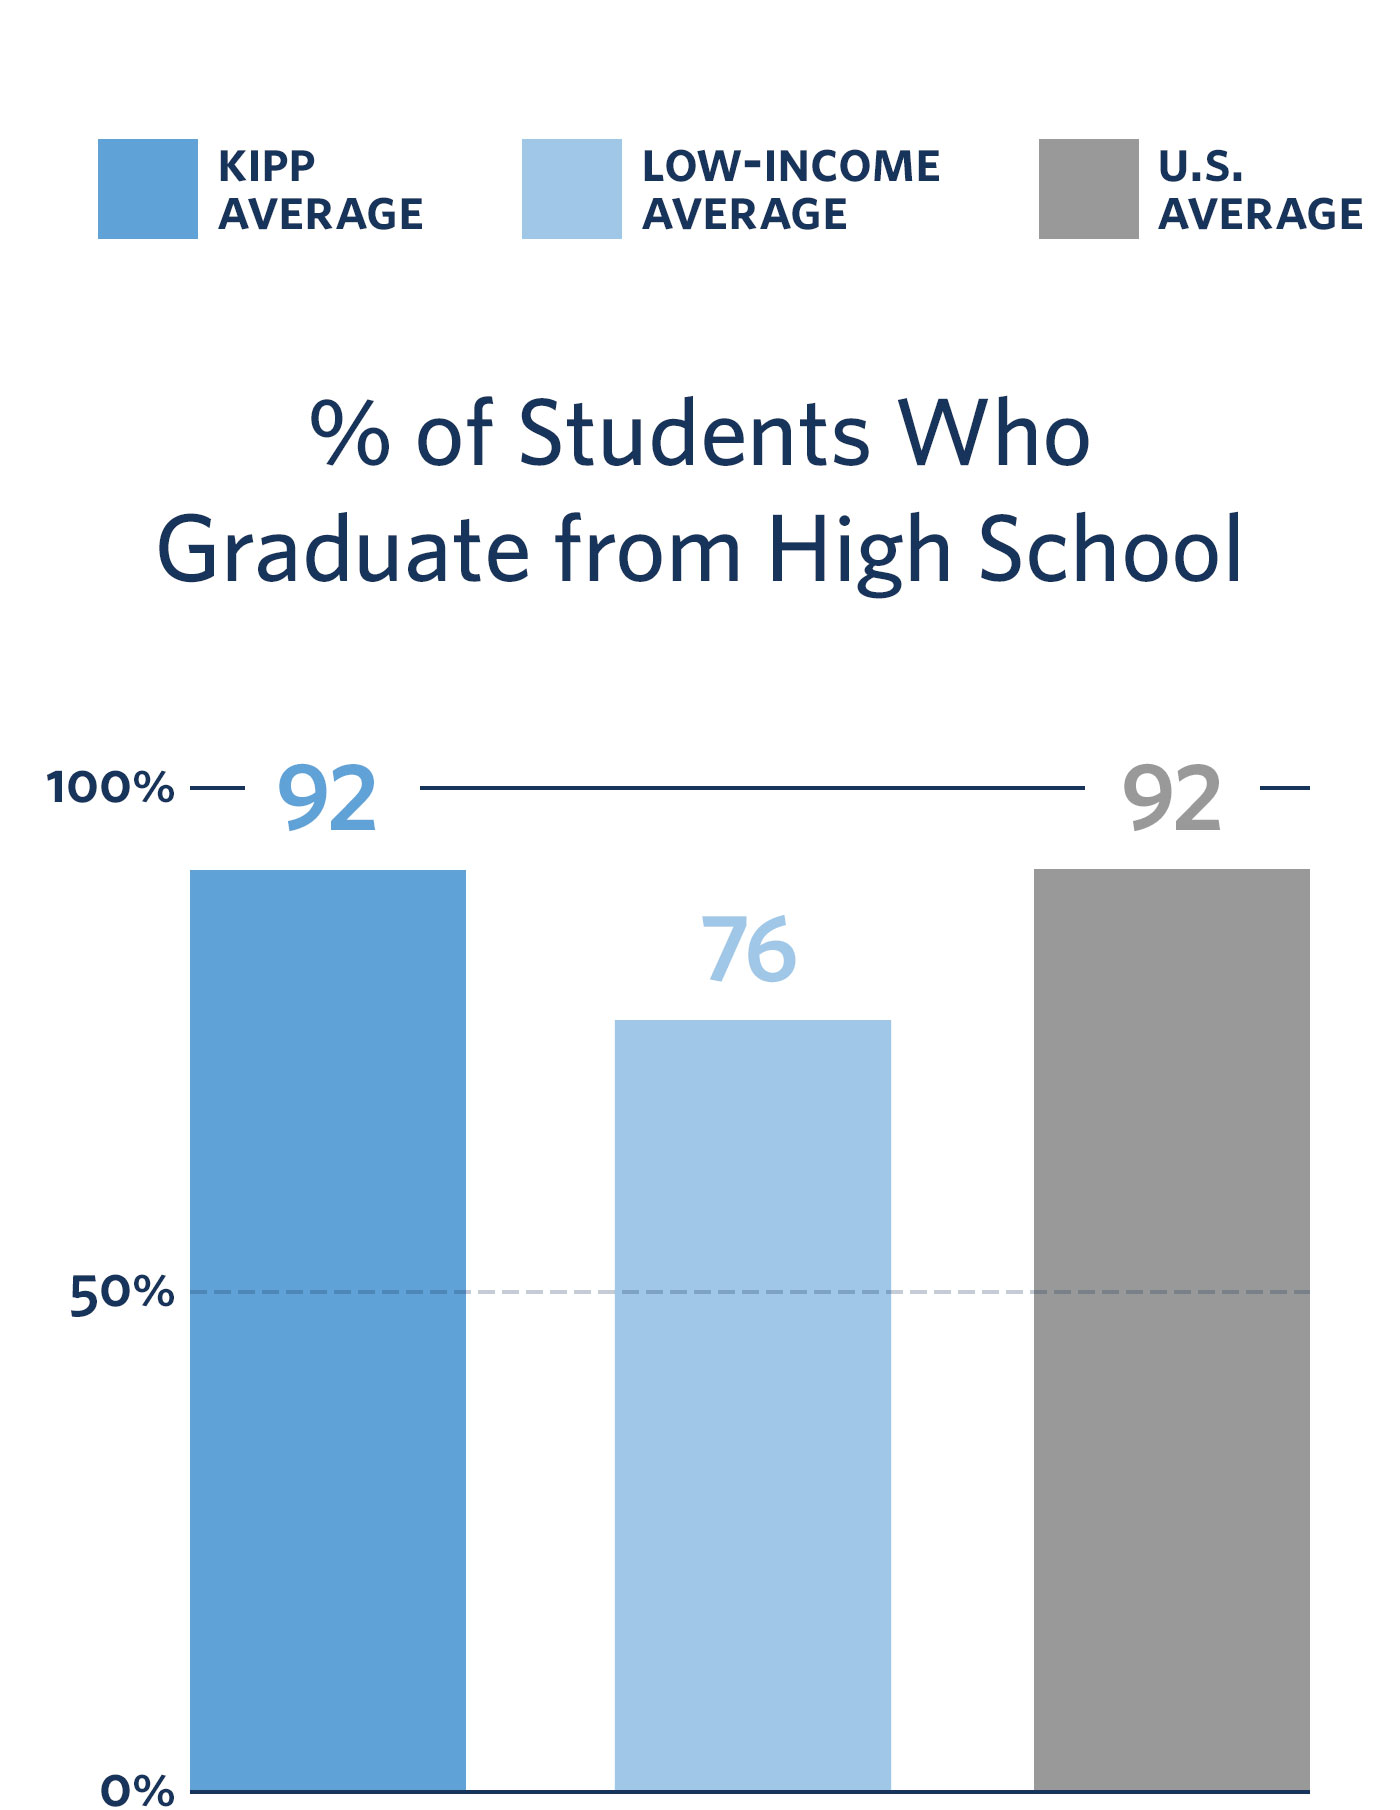 Percentage of Students Who Graduate from High School: 92% KIPP Average, 76% Low-Income Average, 92% U.S. Average